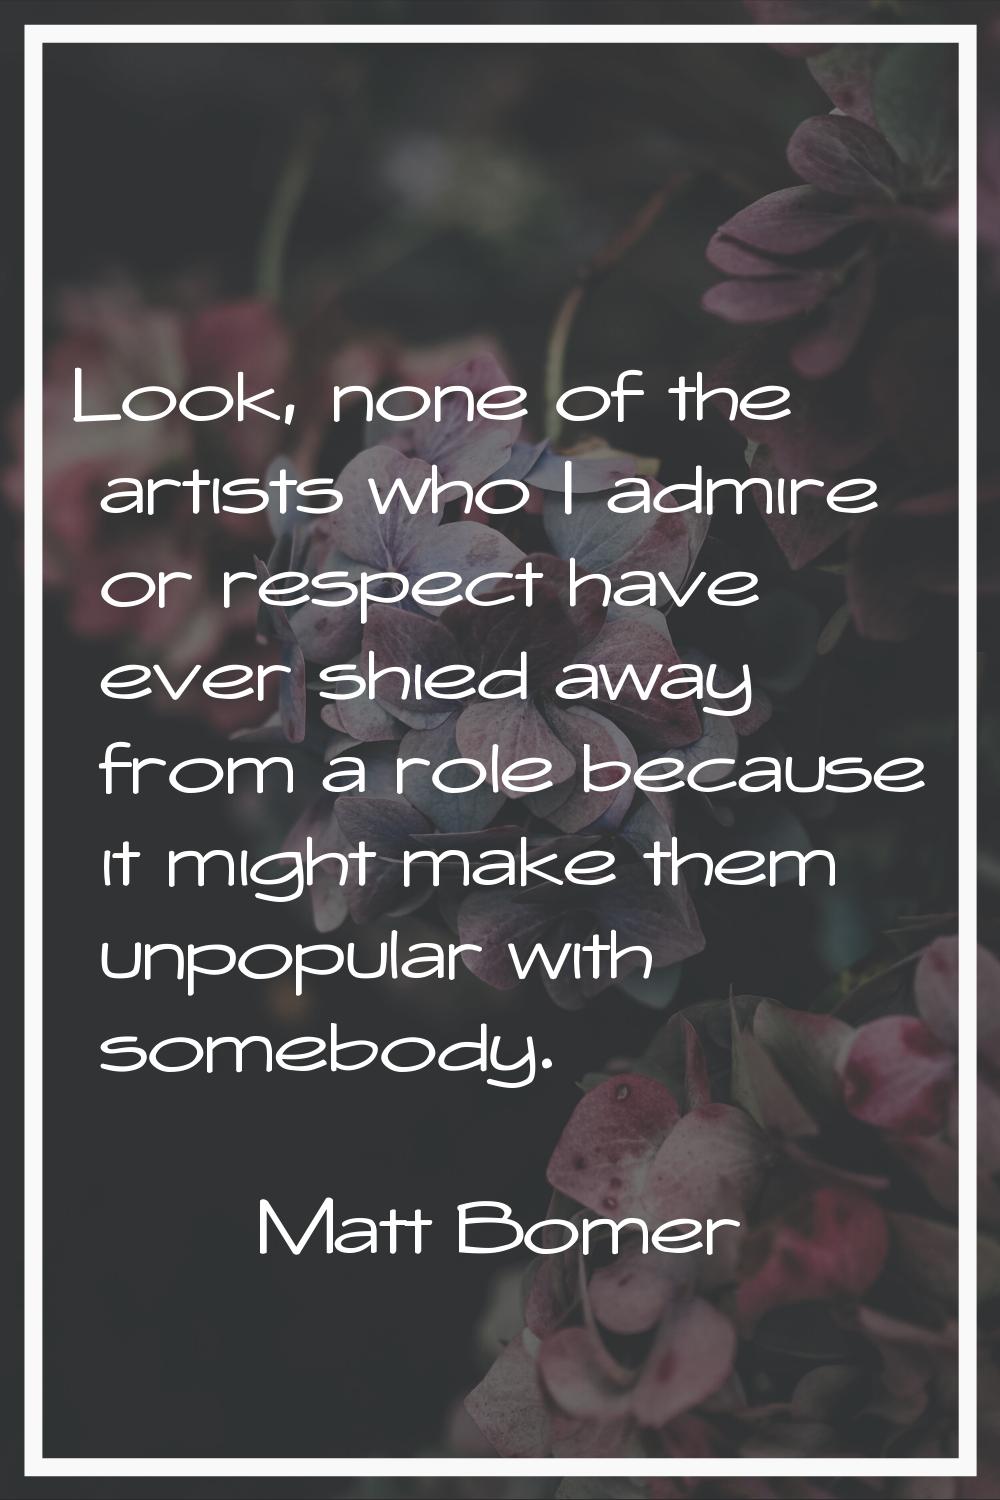 Look, none of the artists who I admire or respect have ever shied away from a role because it might